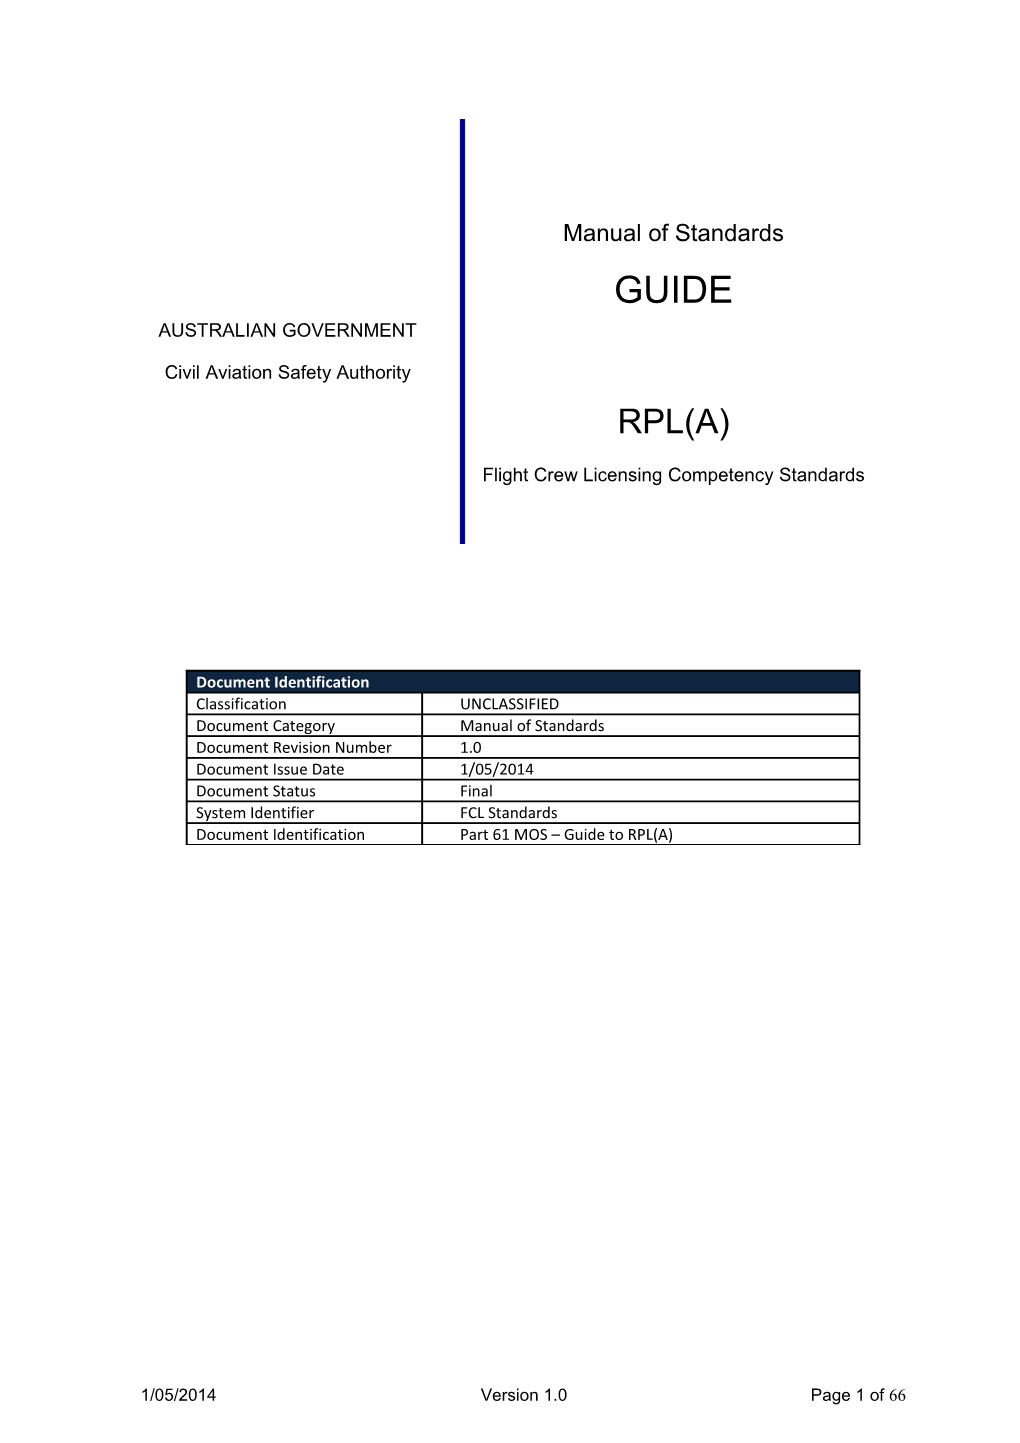 Part 61 Manual of Standards (GUIDE) Recreational Pilot Licence Aeroplane Category